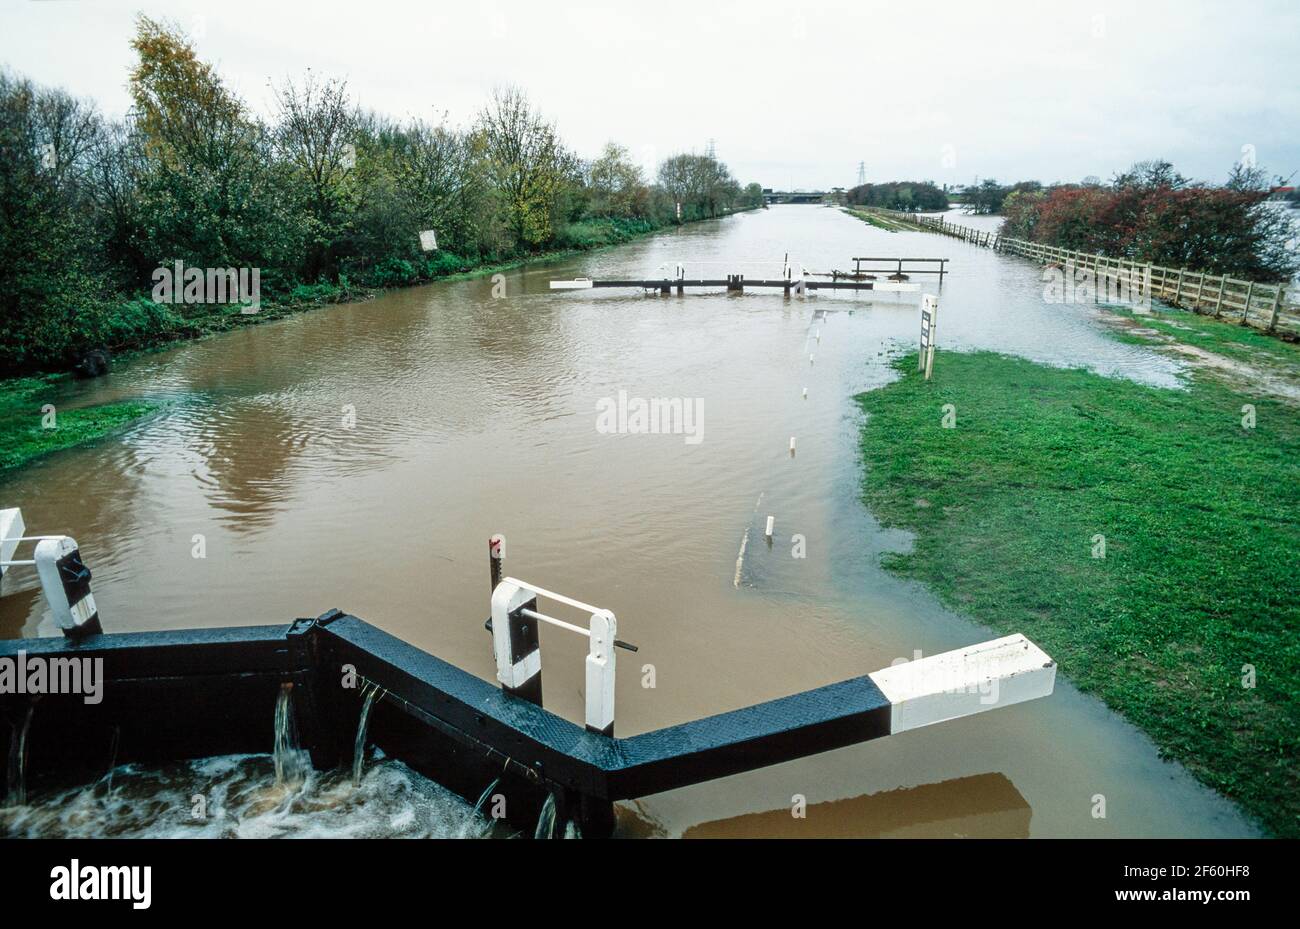 2000 Sawley - Flooding caused by prolonged rainfall in October and November 2000. Over the Harrington Bridge in Sawley, both Marshalls brick yard and the Plank and Leggit public house lost business as the road was closed due to severe flooding. The lock gates here on the River Trent at Sawley marina have been overwhelmed by the flood water. The B6540 Tamworth road was shut to traffic at this point.Sawley marina, Sawley, Derbyshire ,England, UK, GB,  Europe Stock Photo